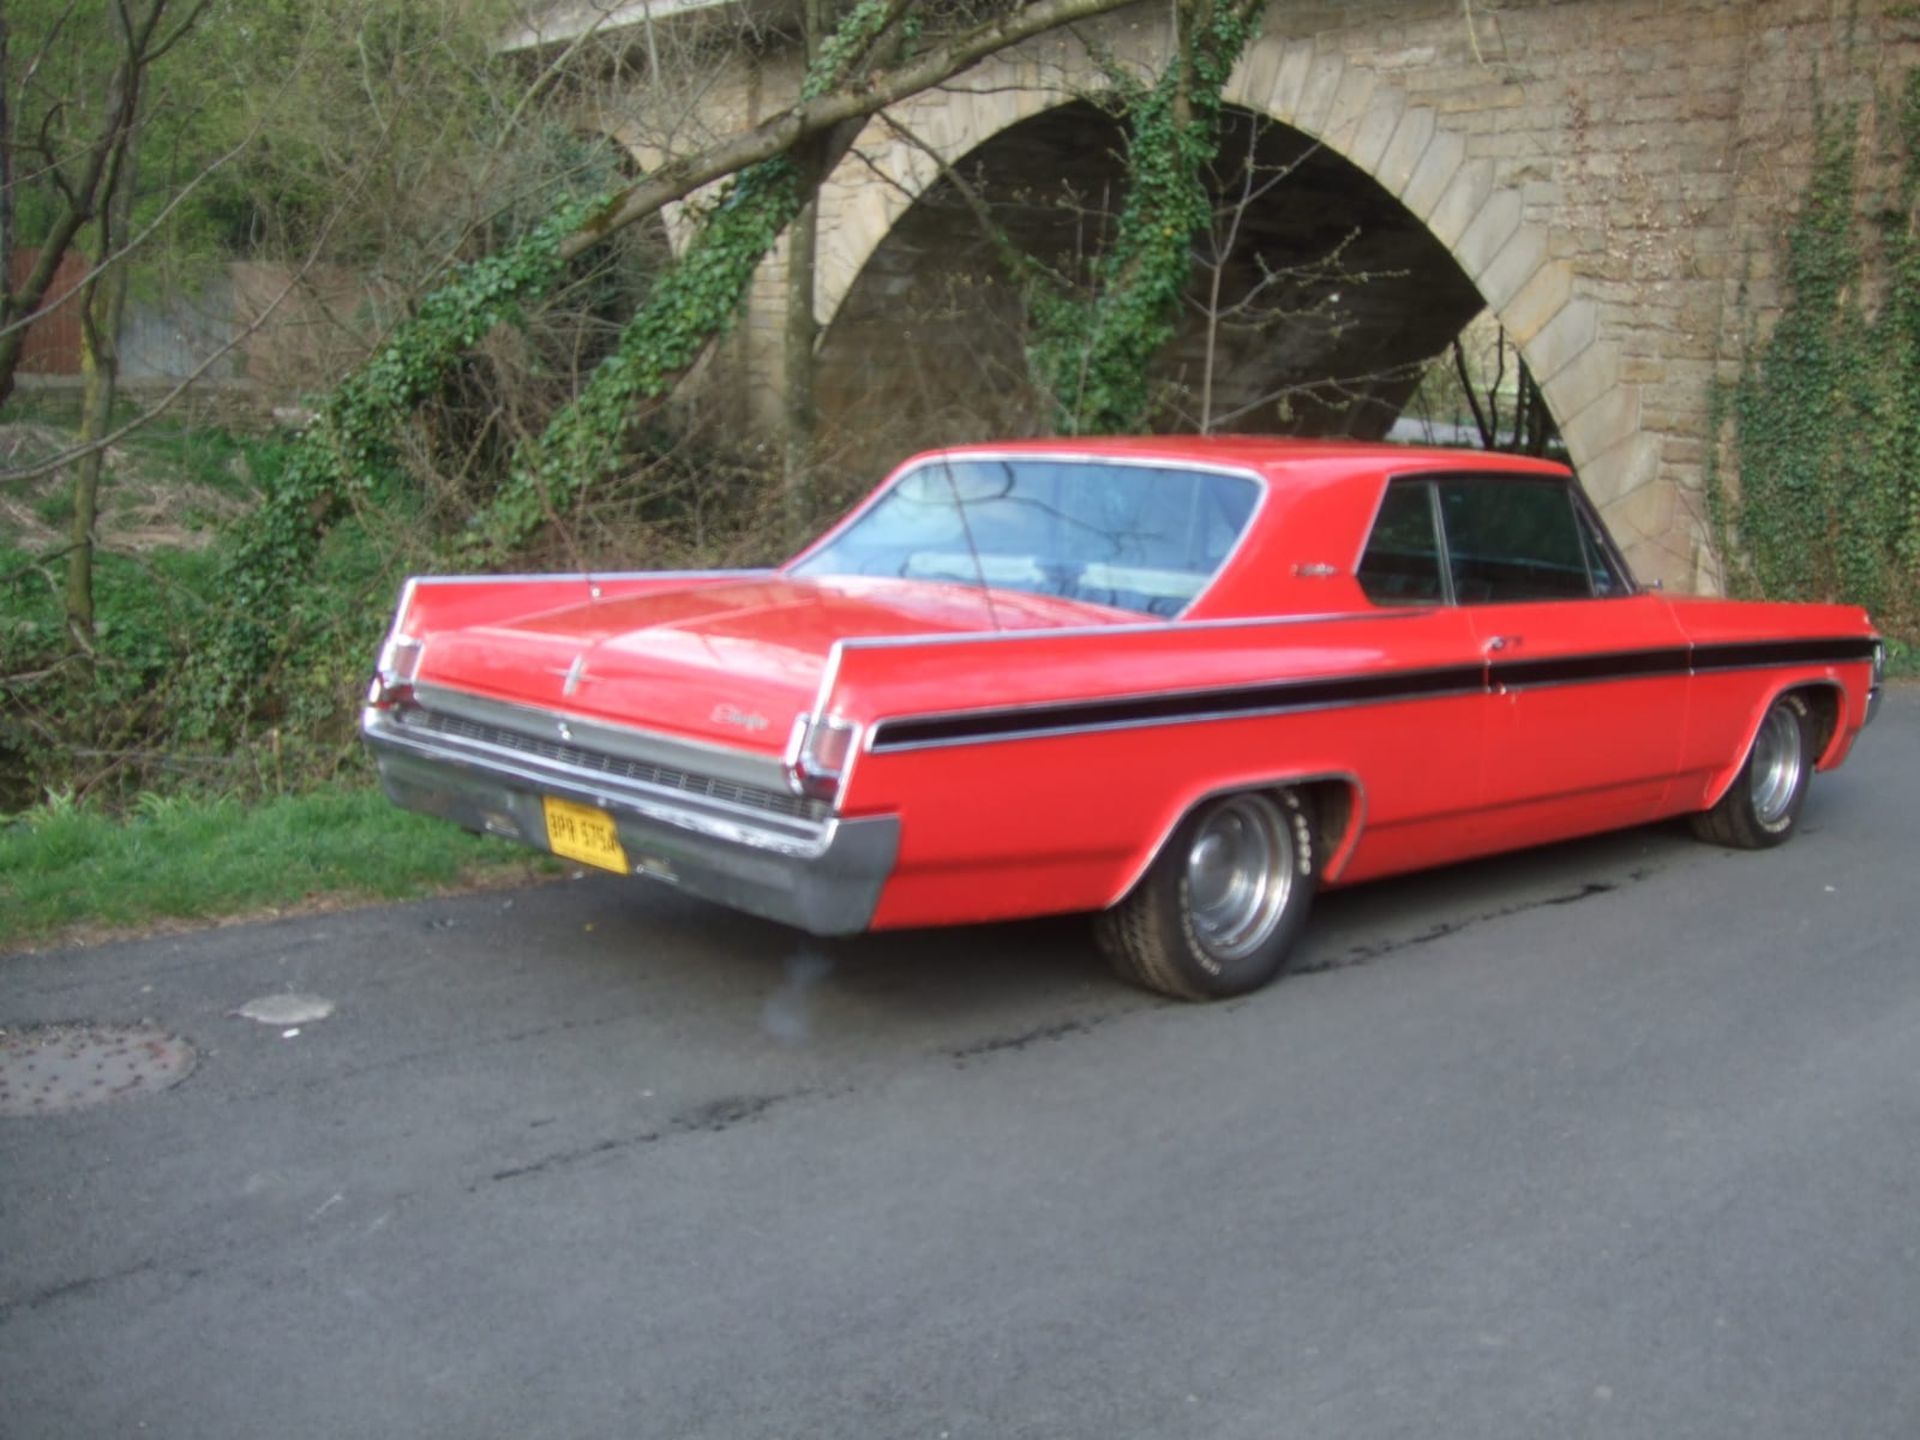 1963 OLDSMOBILE, STARFIRE COUPE, RARE CAR! SHOWING 71,026 MILES, MOT AND TAX EXEMPT *NO VAT* - Image 4 of 11